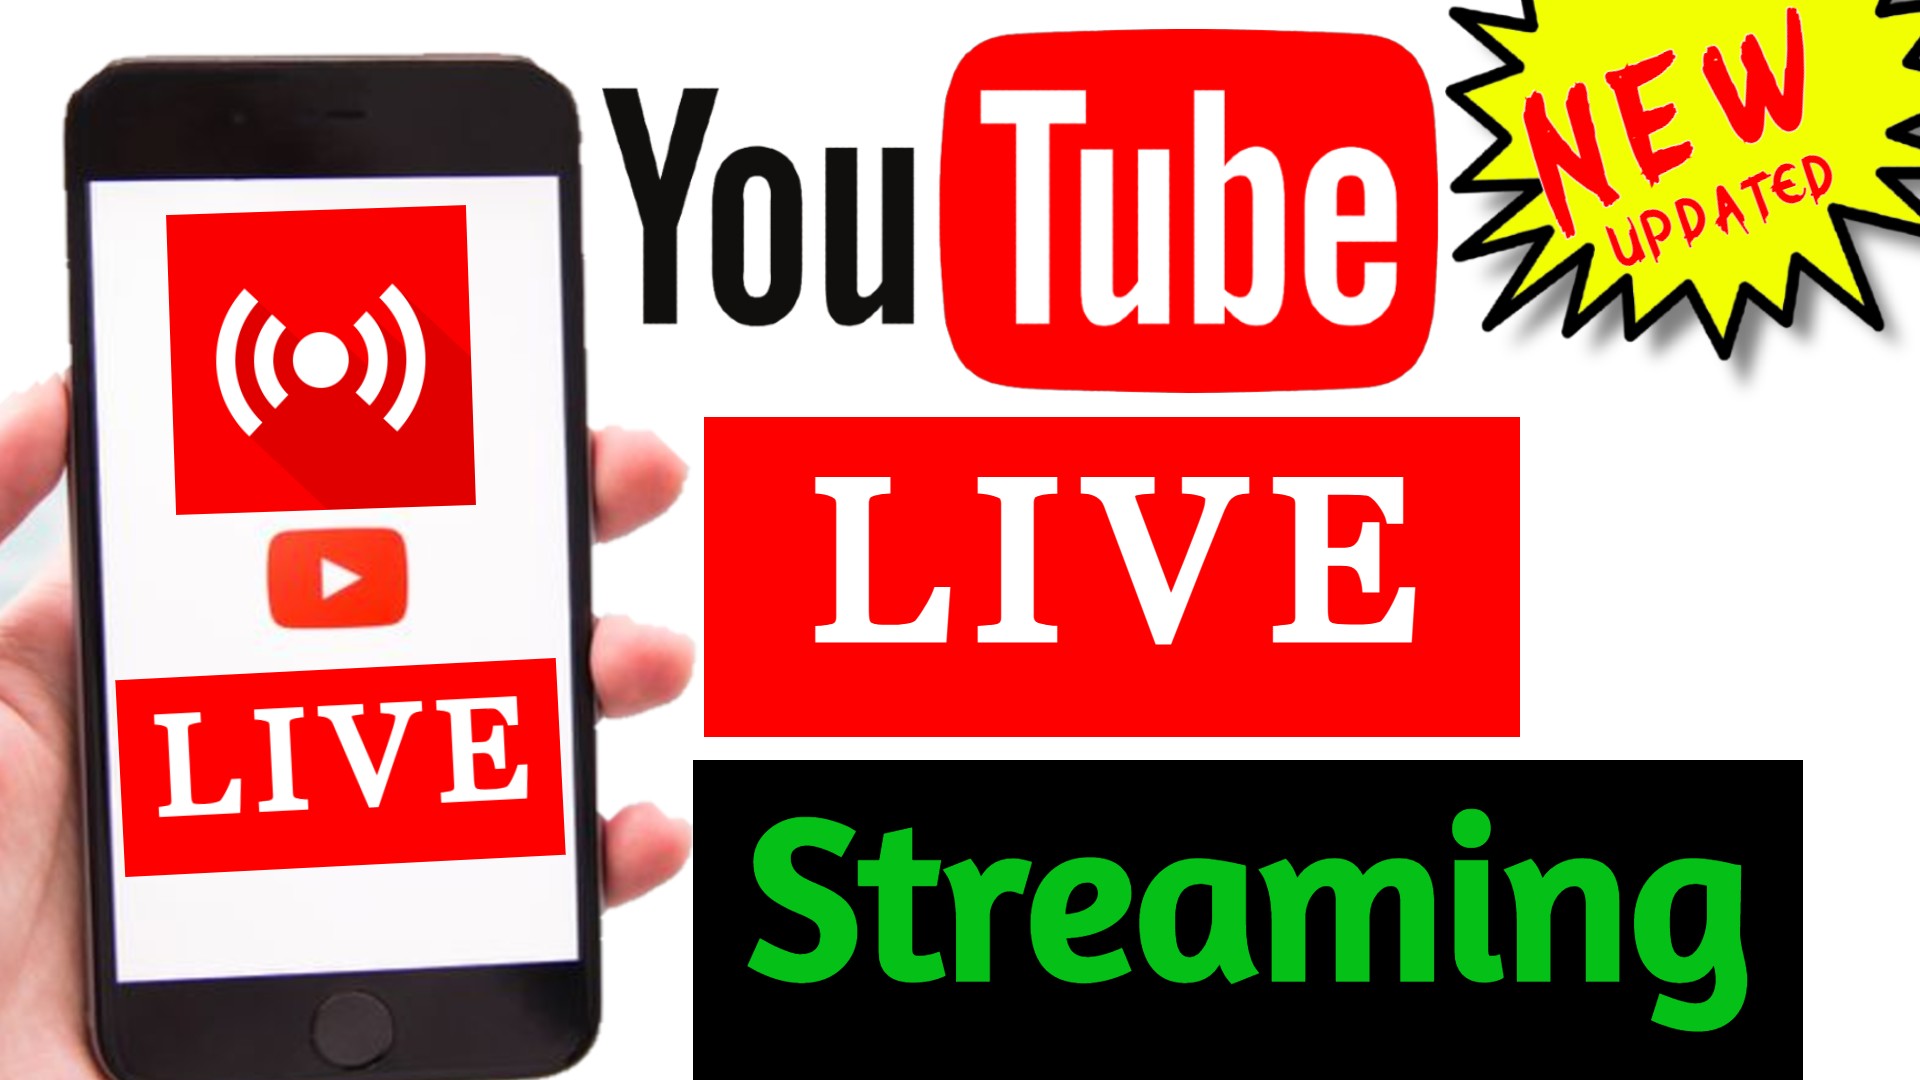 YouTube Mobile Live streaming updated